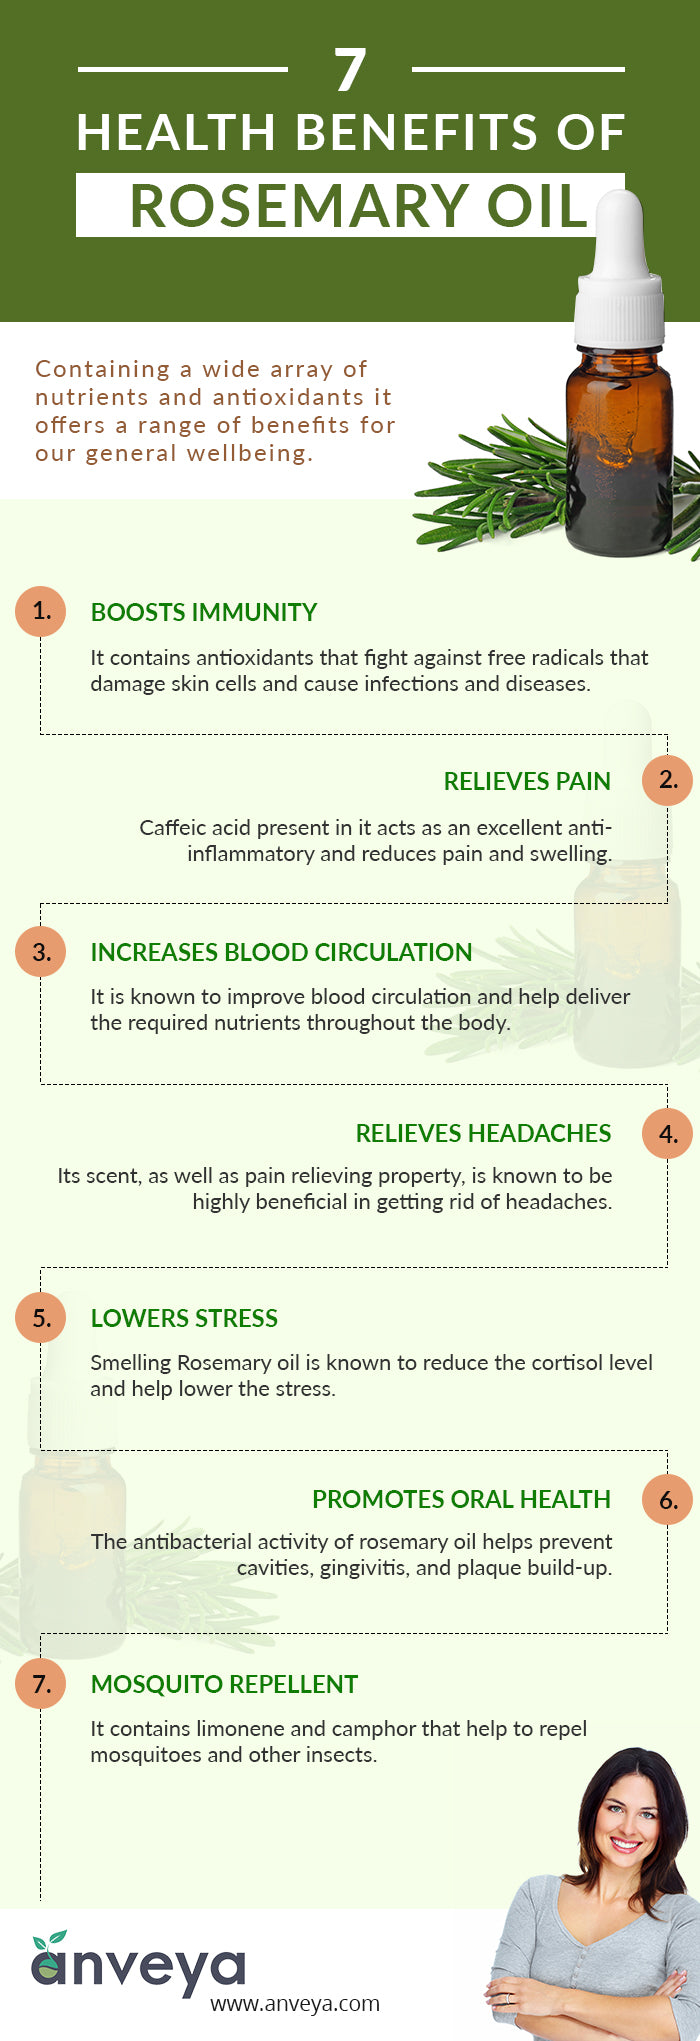 7 Health Benefits of Rosemary Oil